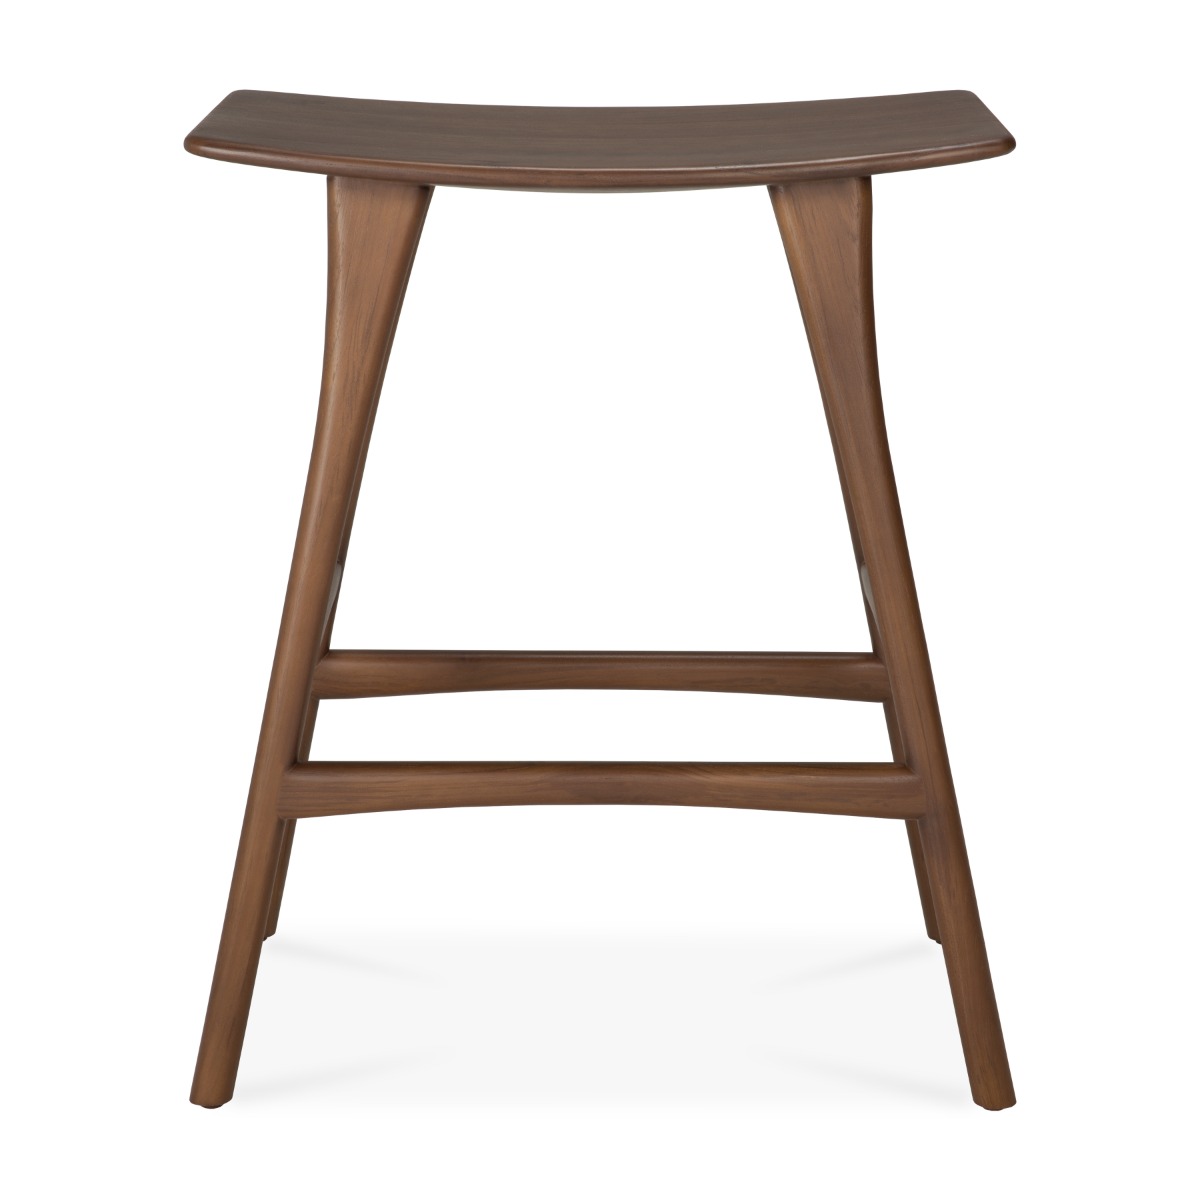 Osso counter stool in Teak Brown